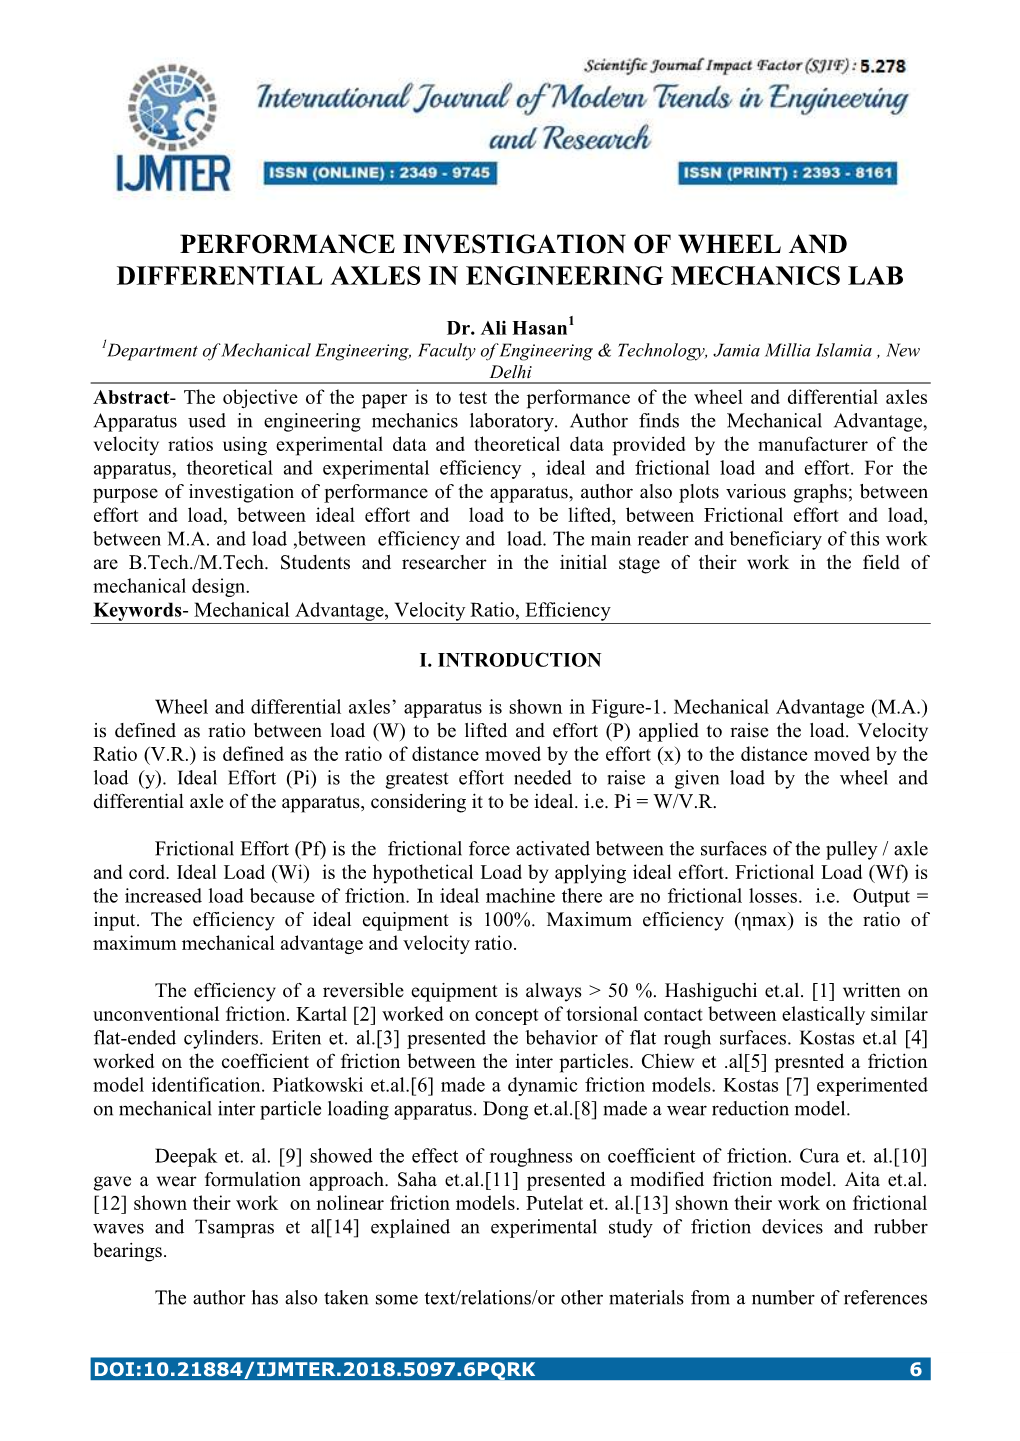 Performance Investigation of Wheel and Differential Axles in Engineering Mechanics Lab